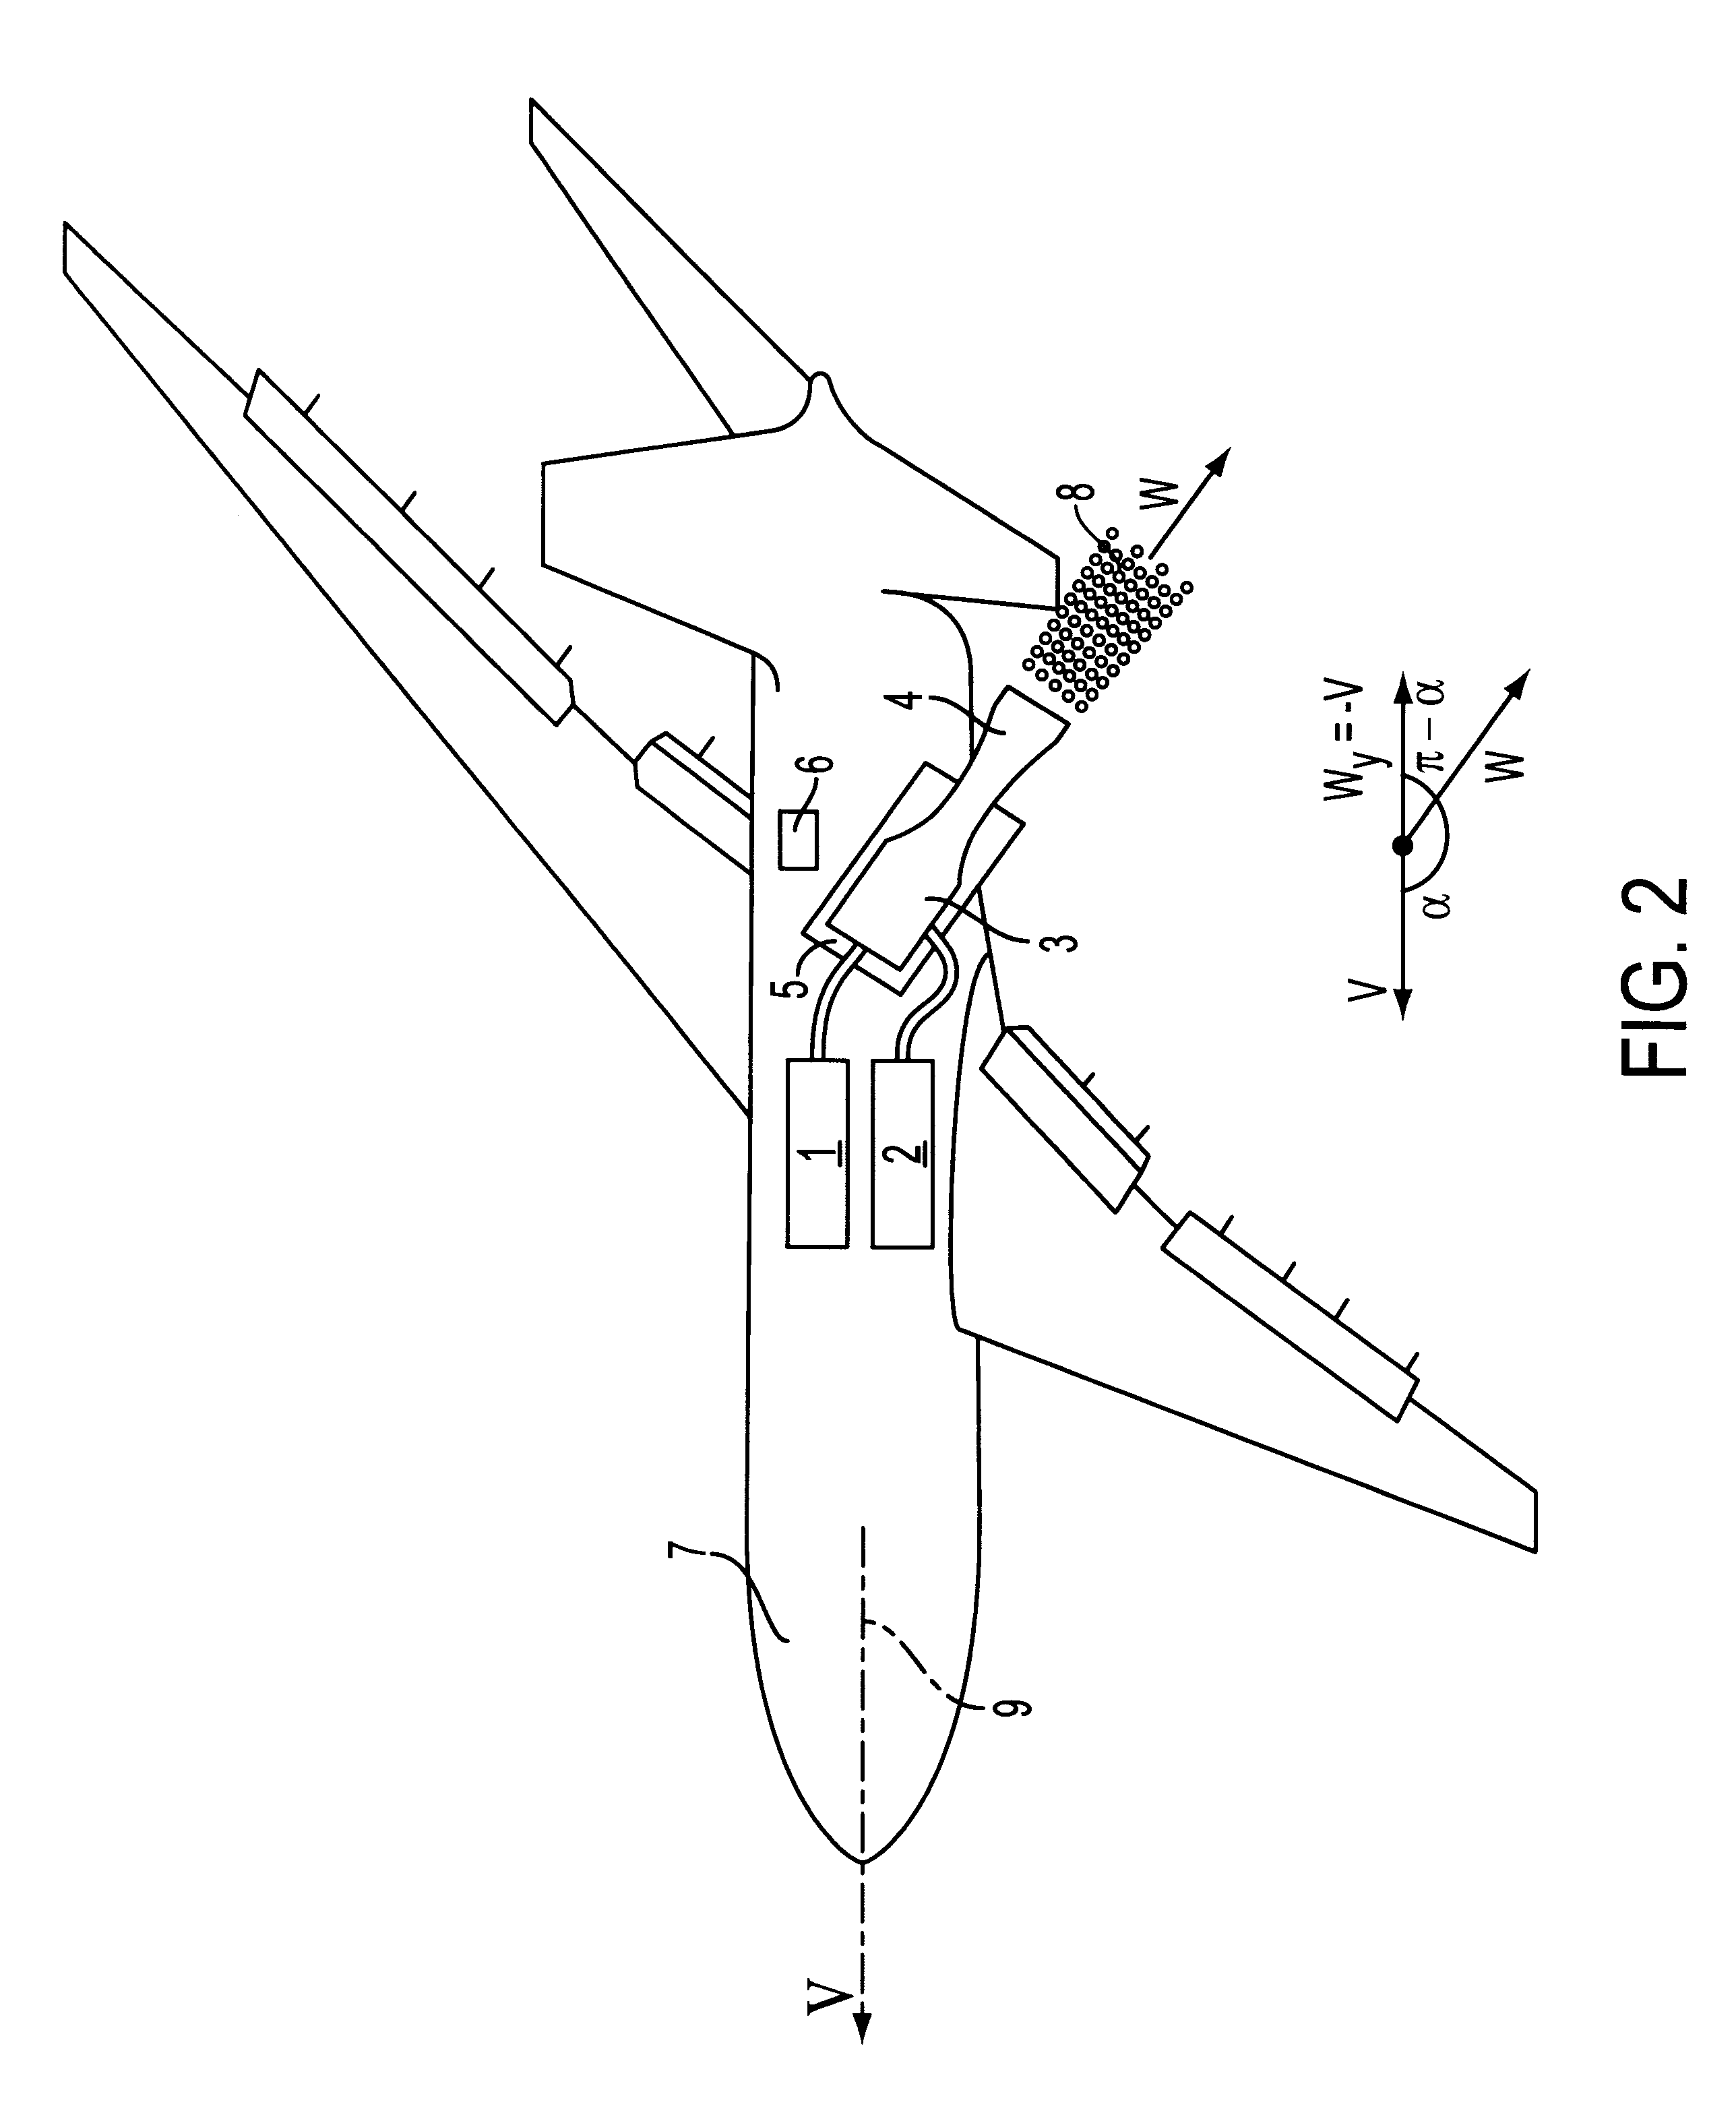 Method for extinguishing fires from an aircraft and related device